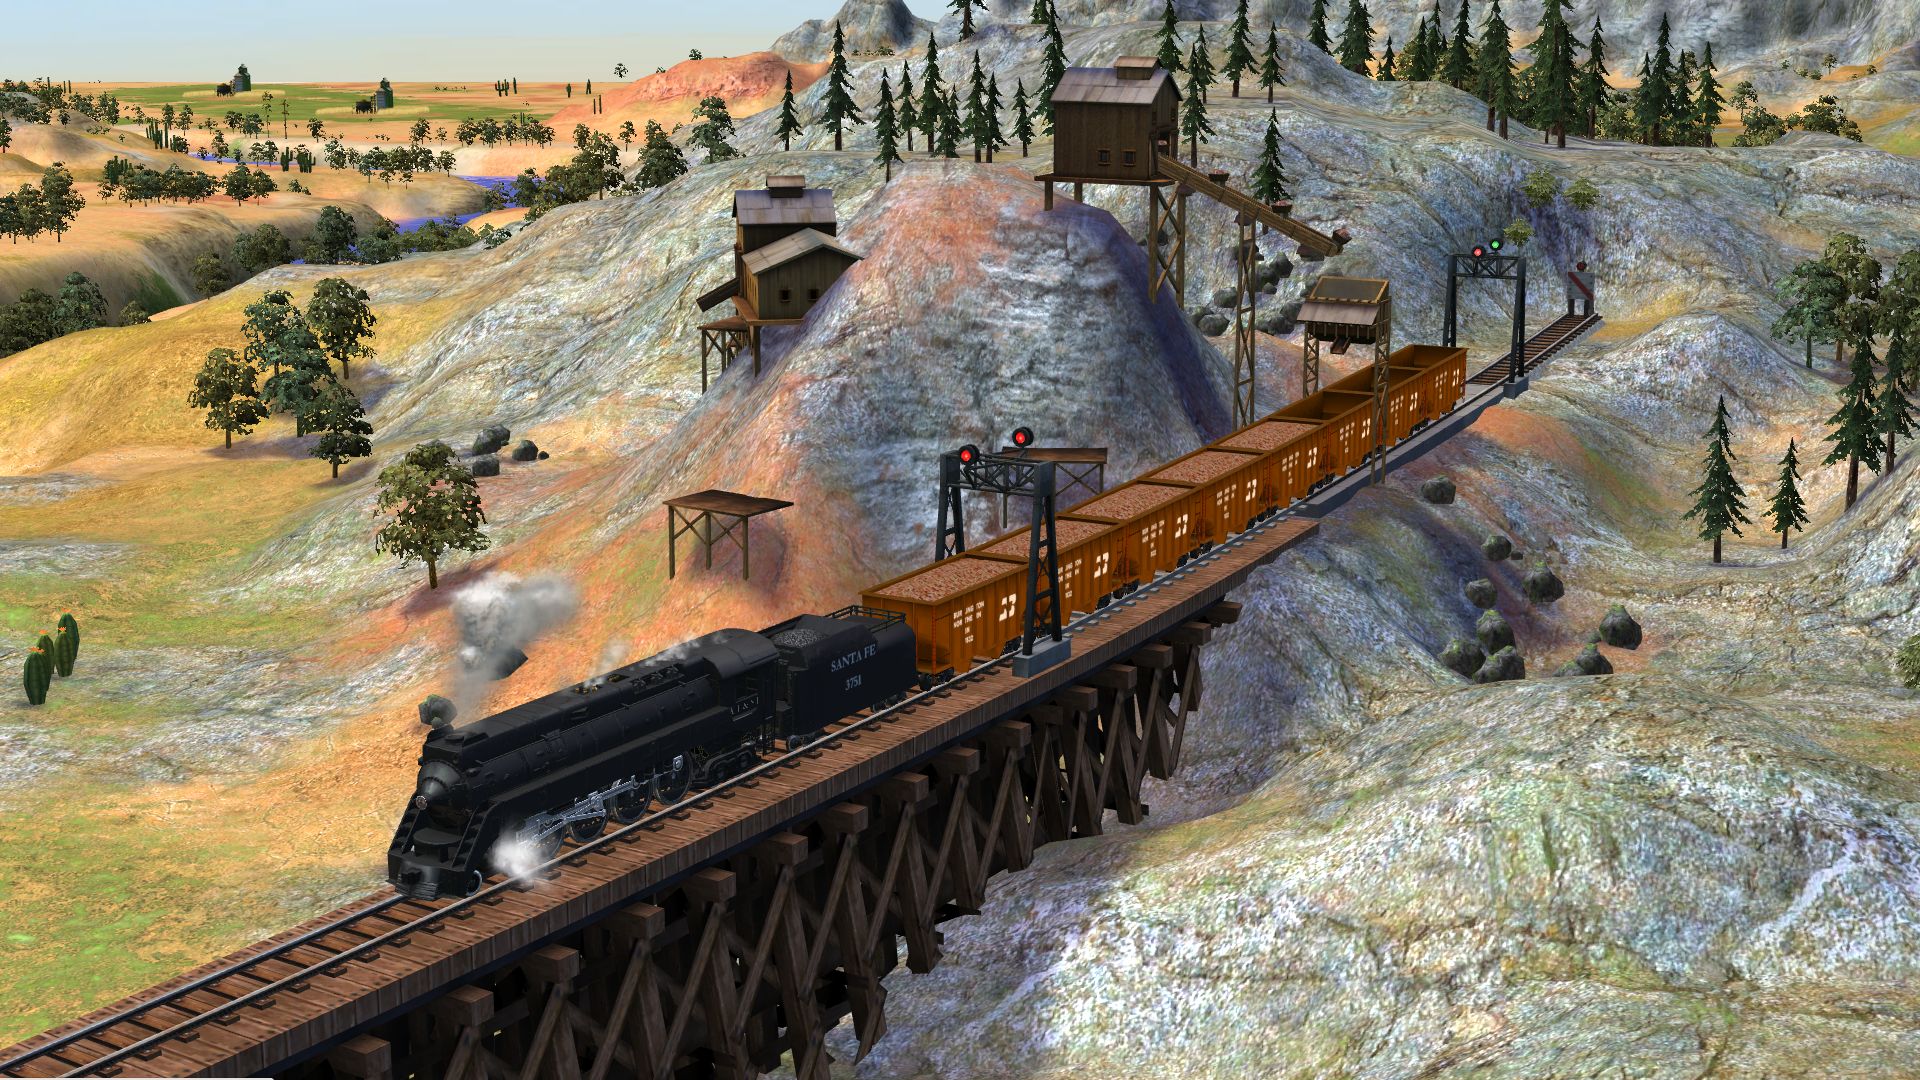 sid meiers railroads running but not visible